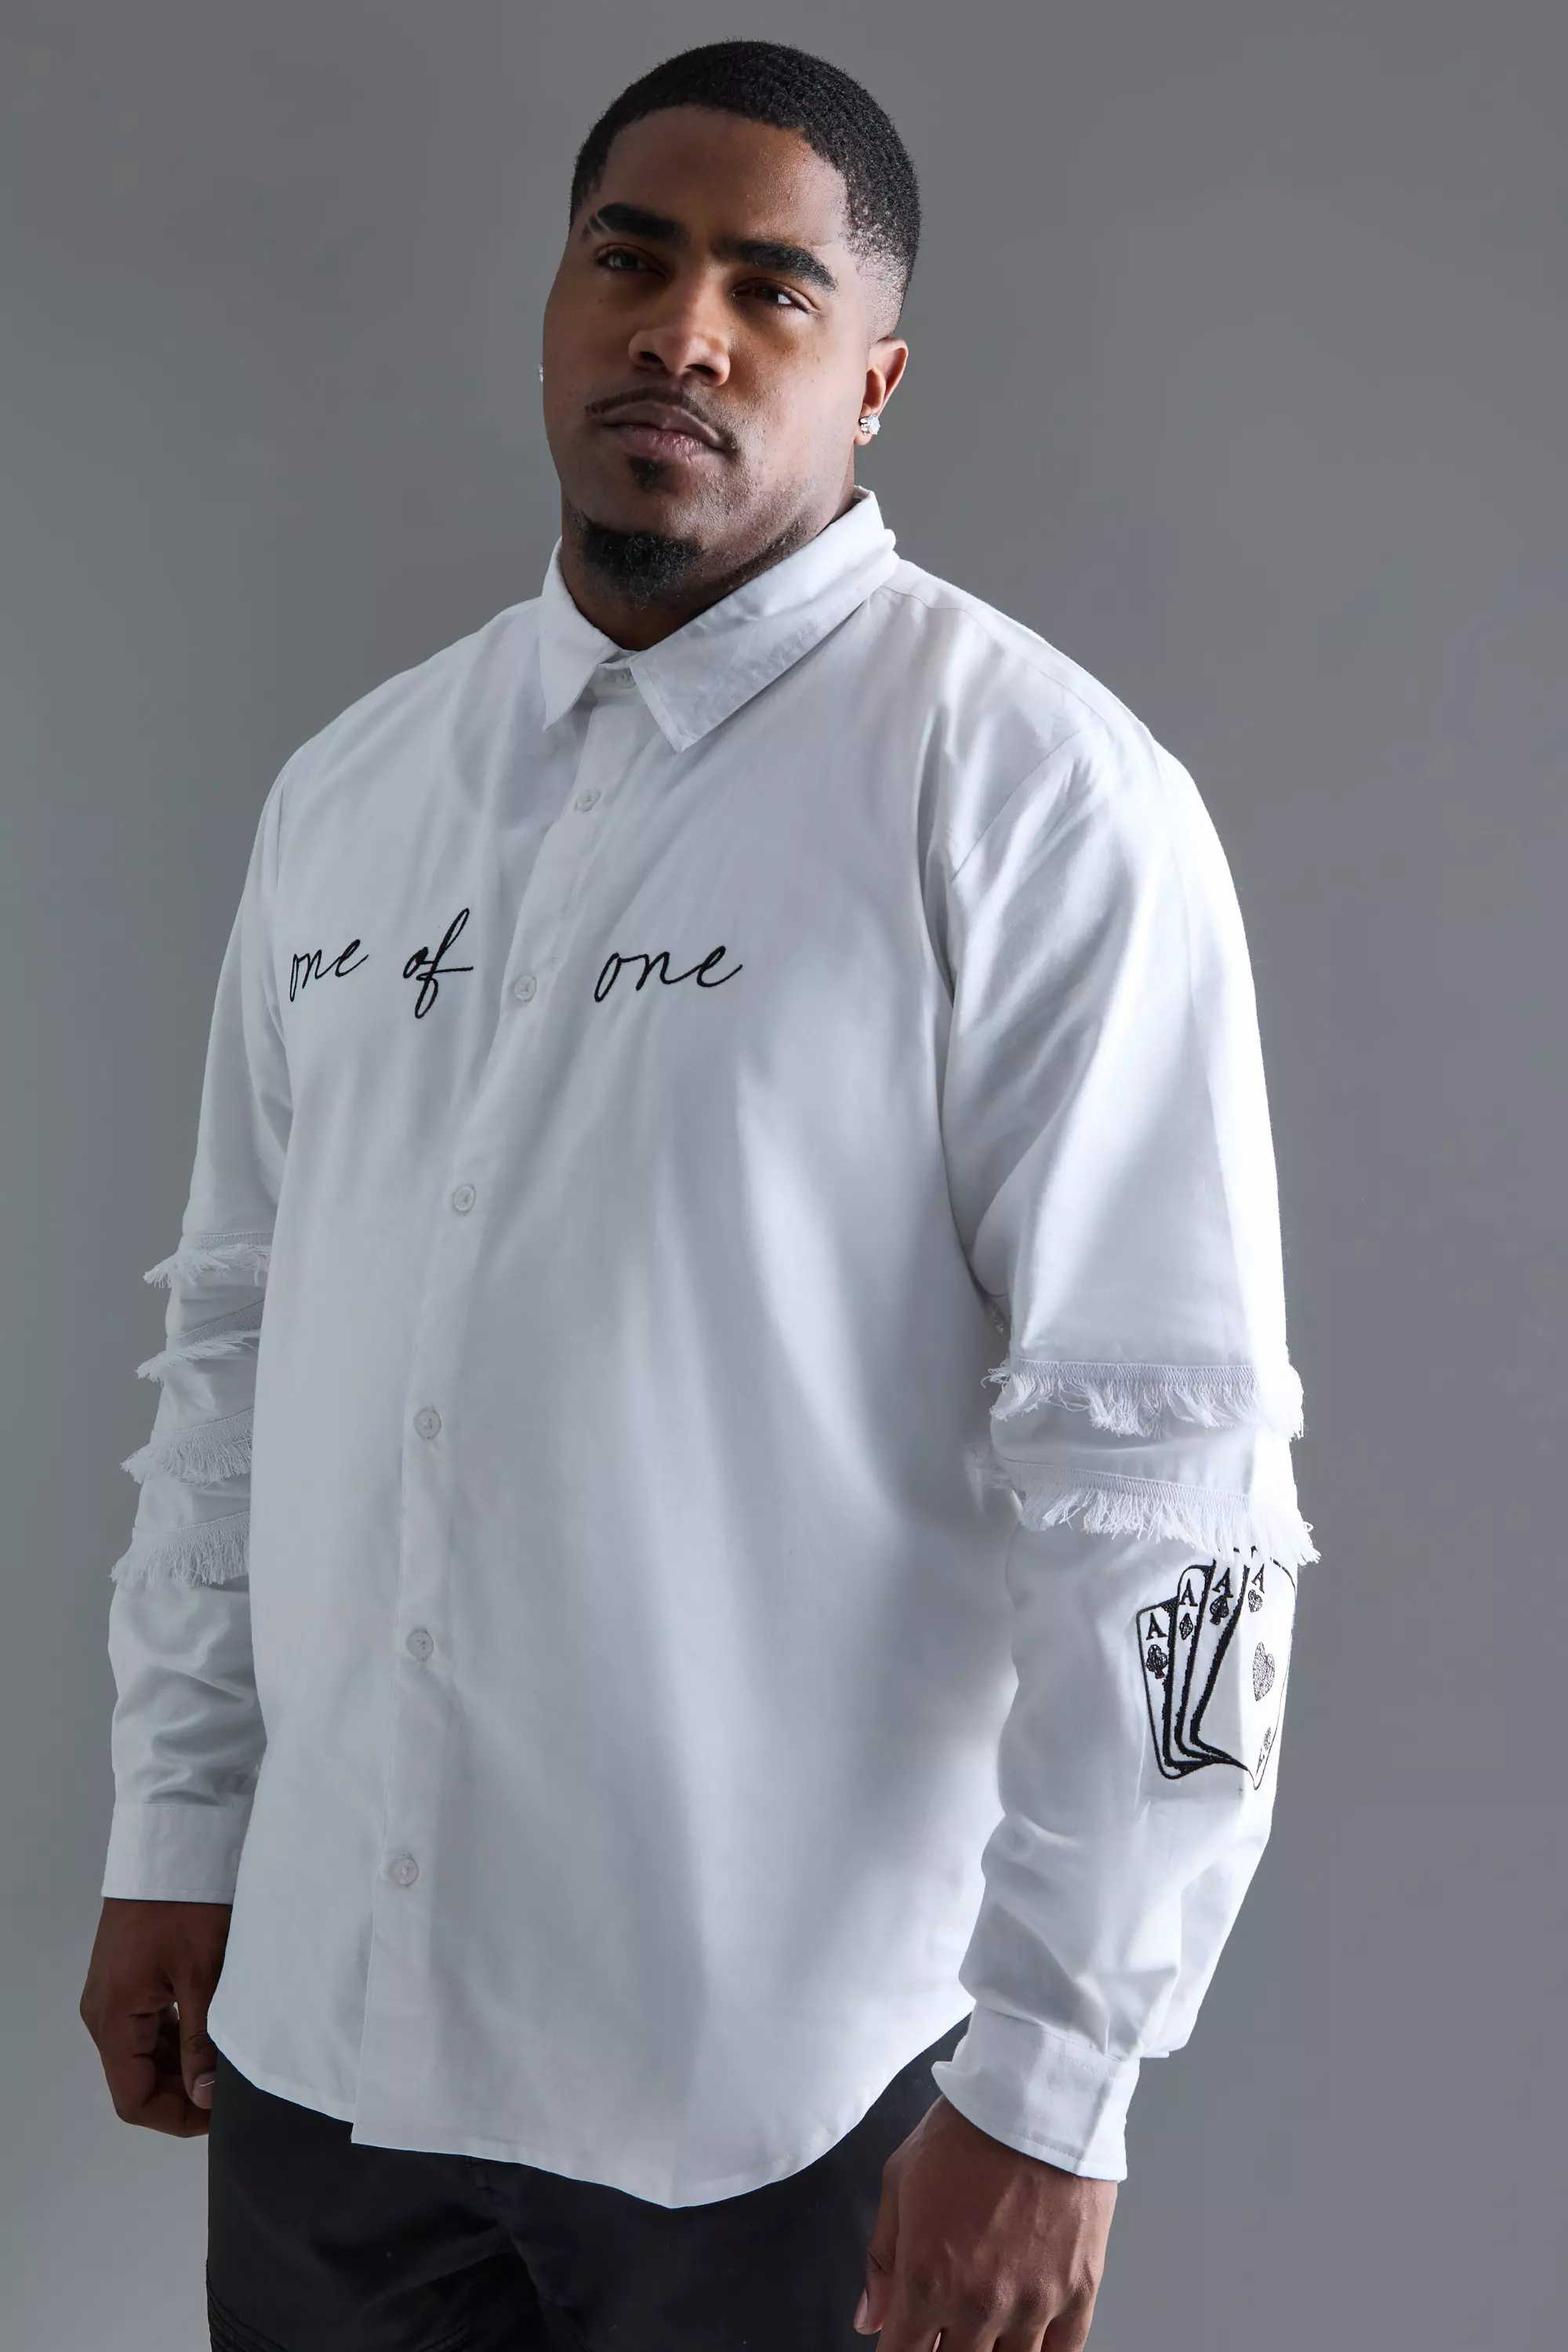 Plus Longsleeve One Of One Embroidered Shirt White